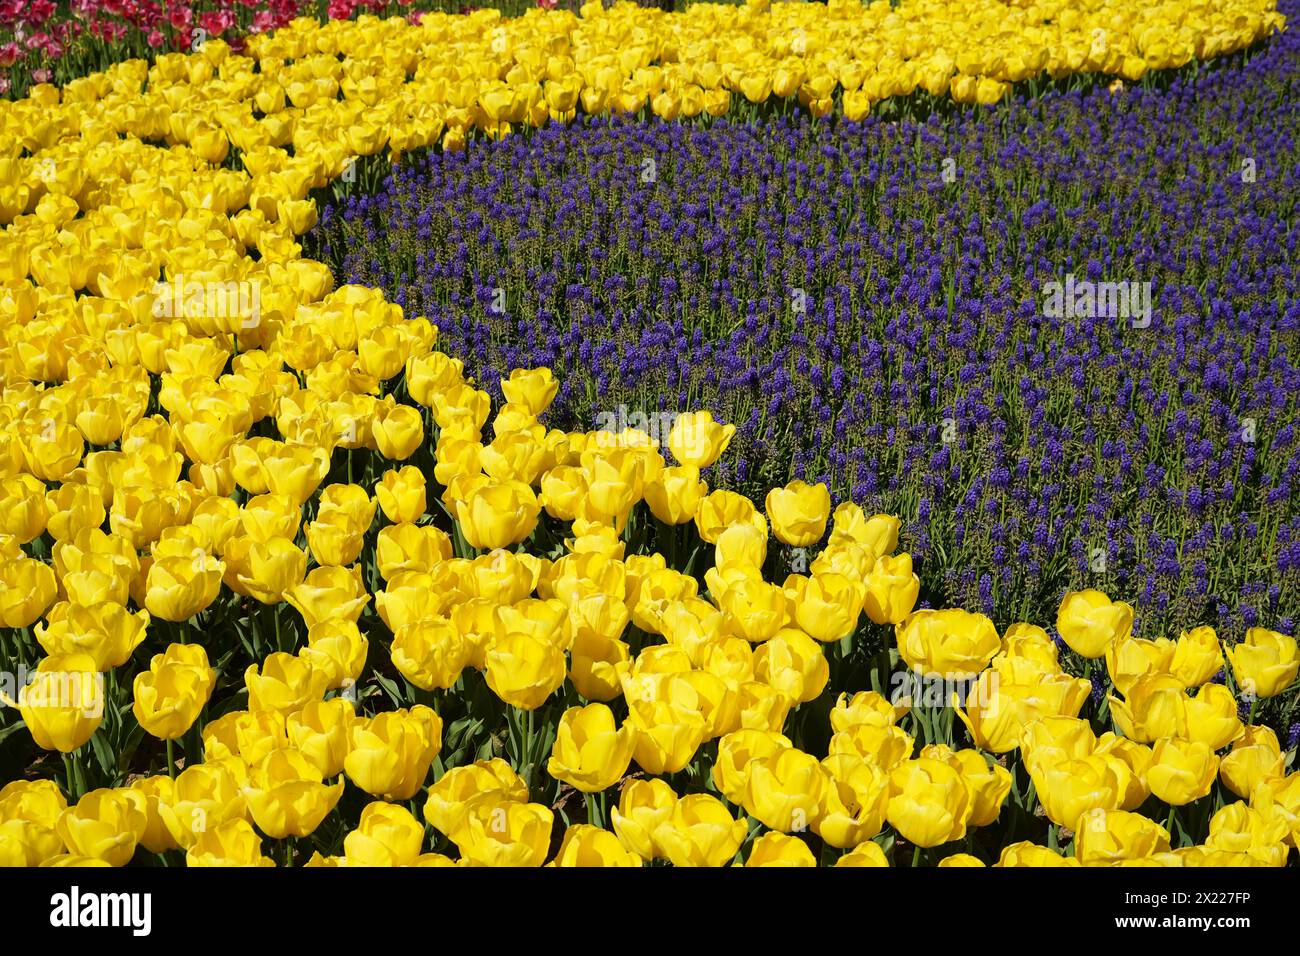 Bulbous flower that blooms every year in April, yellow tulips with very vibrant colors and arabian hyacinth, Turkey Istanbul Emirgan grove Stock Photo